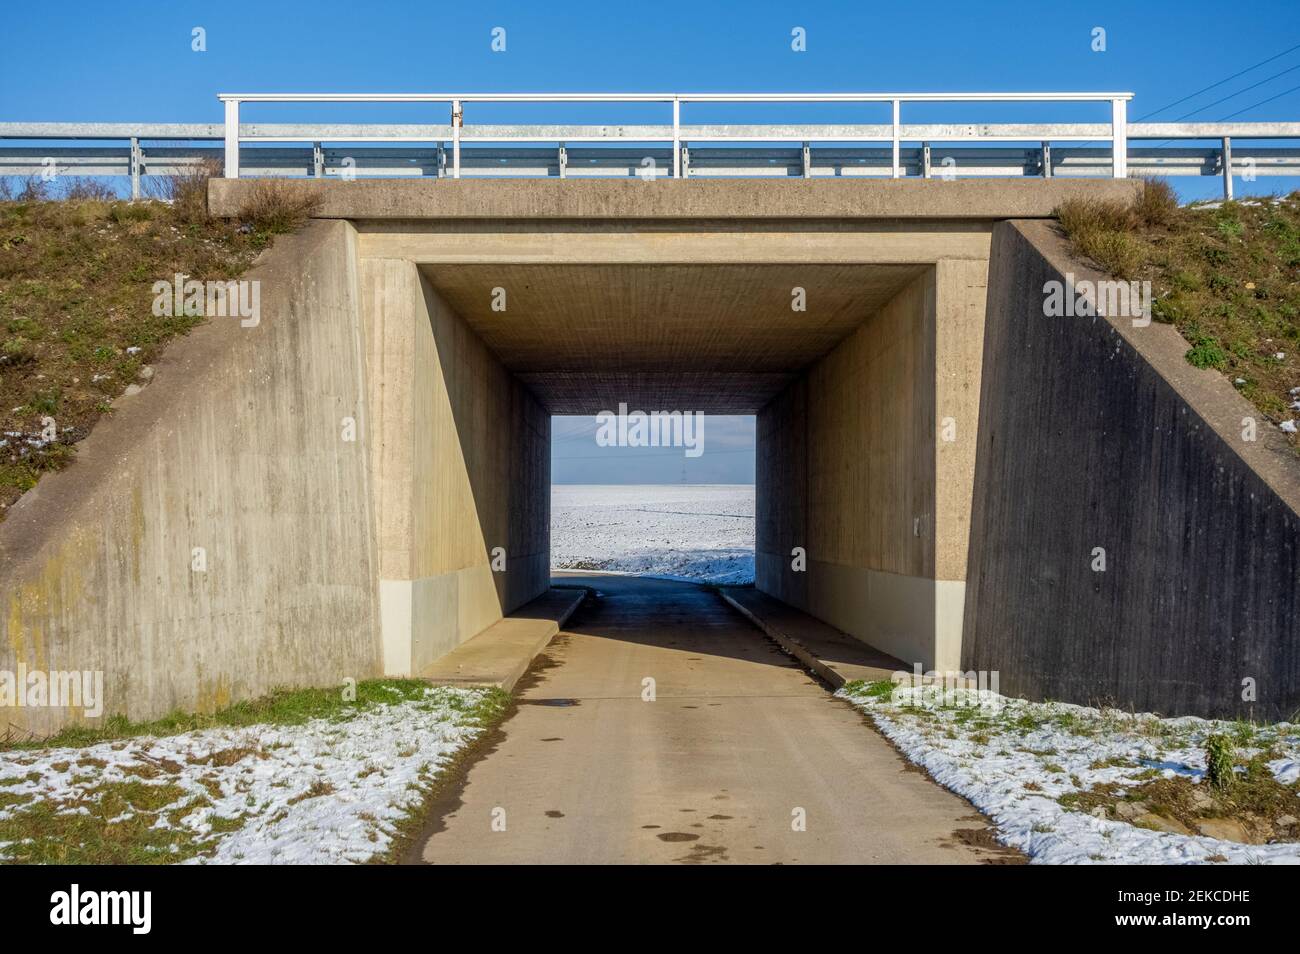 highway bridge in sunny ambiance at winter time Stock Photo